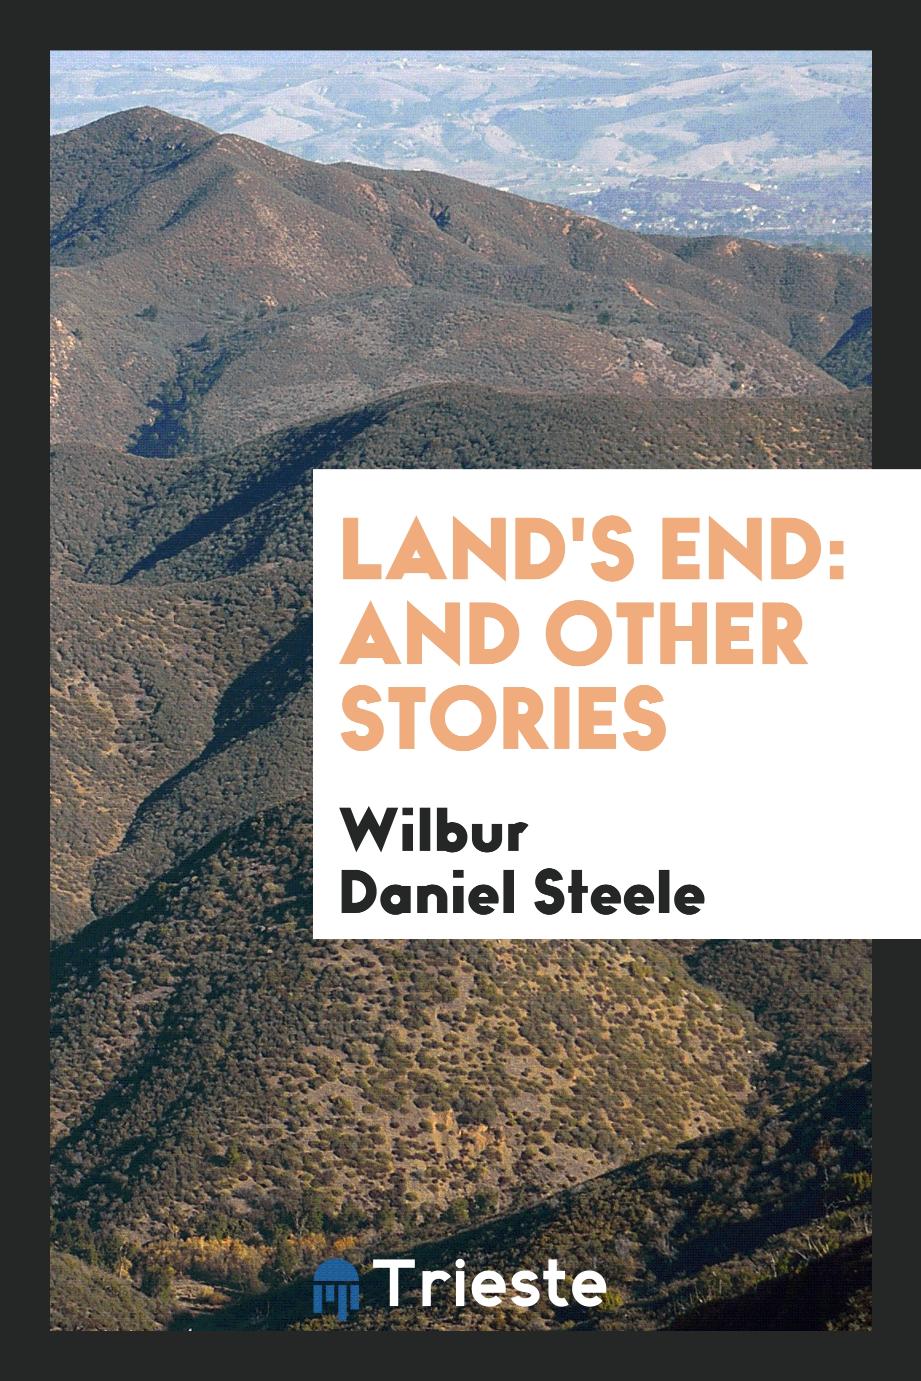 Land's End: And Other Stories